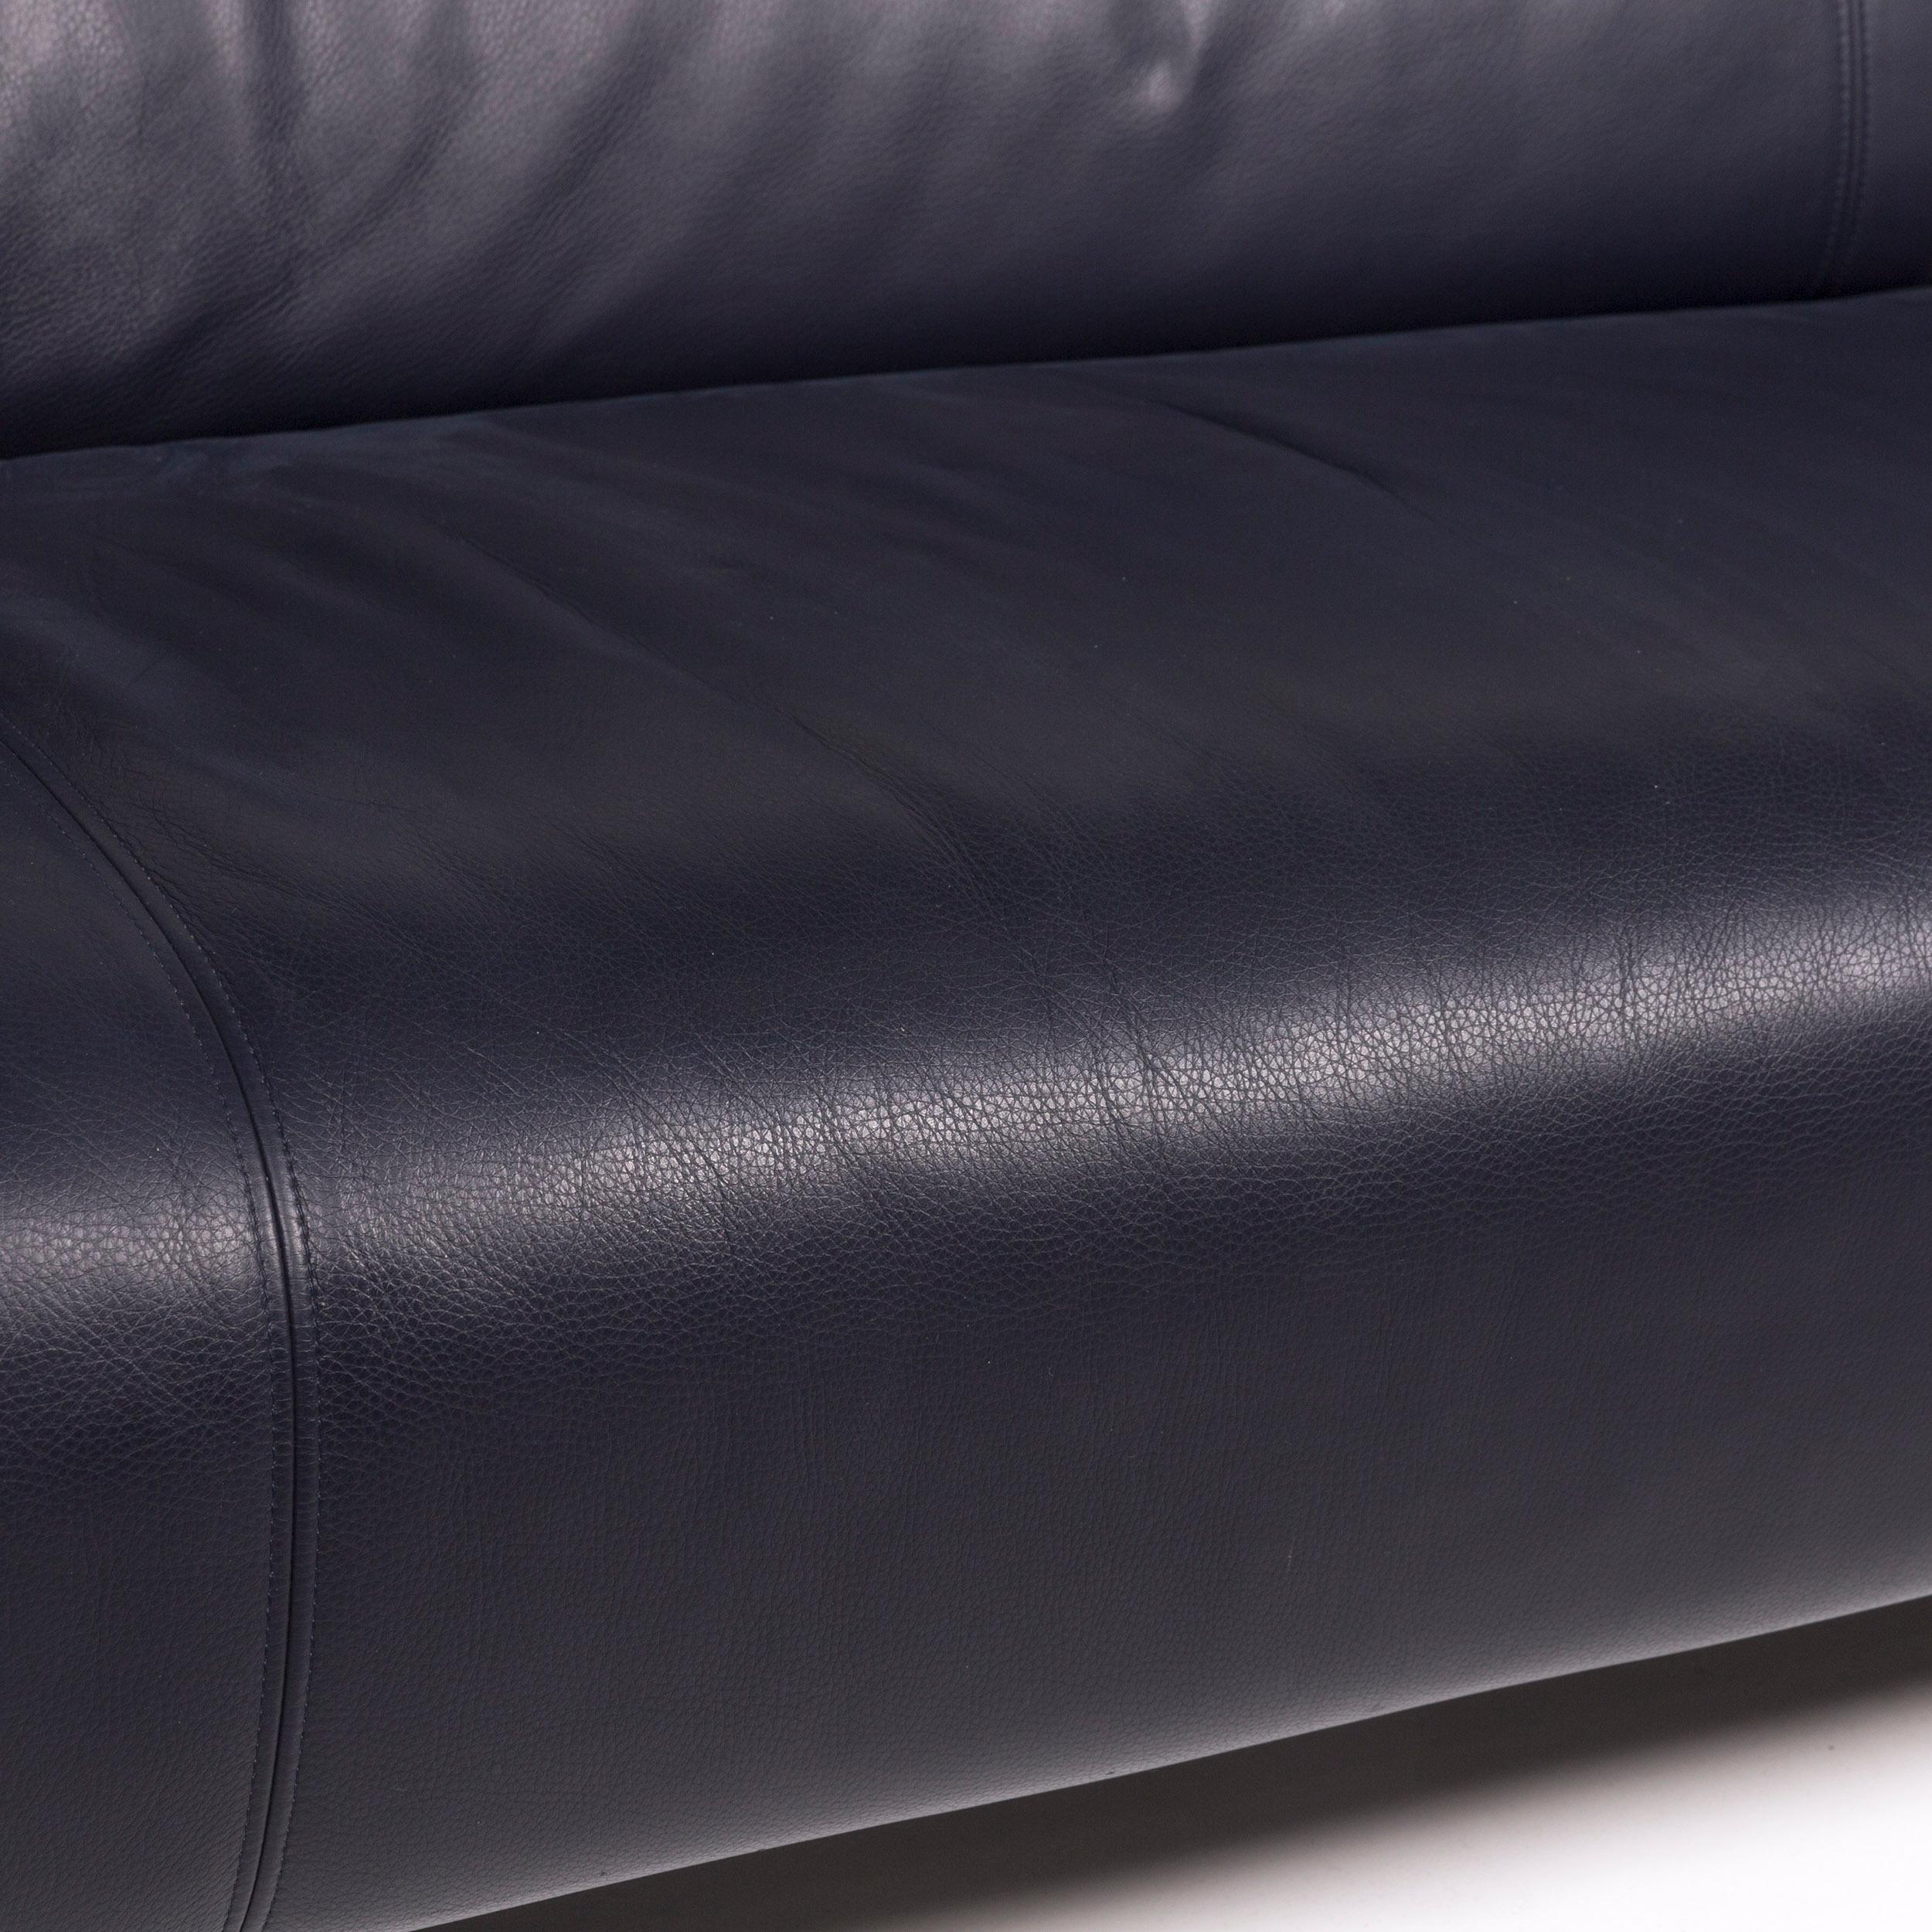 We bring to you a Rolf Benz 322 leather sofa blue dark blue three-seat couch.

 

 Product measurements in centimeters:
 

Depth 92
Width 210
Height 72
Seat-height 41
Rest-height 69
Seat-depth 59
Seat-width 140
Back-height 37.